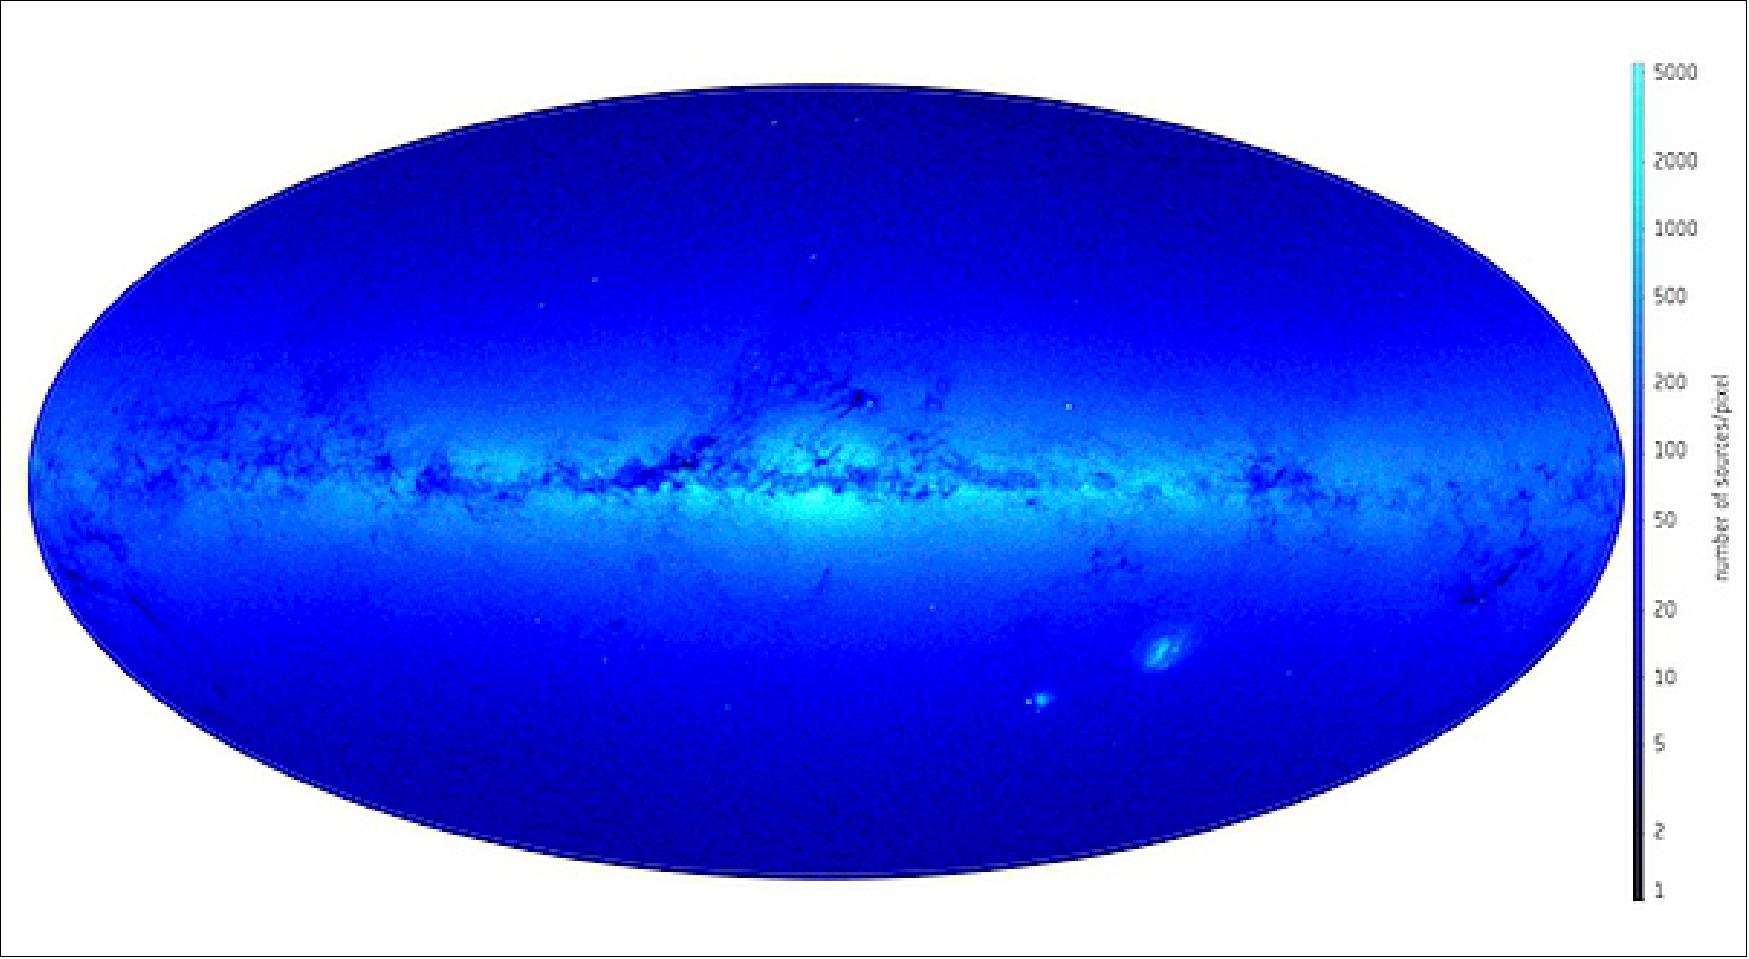 Figure 68: Gaia's density map (companion to the preliminary color sky map). This map shows the distribution on the sky of the stars that have been used to generate a preliminary map of Gaia's sky in color. It is meant as a visual aid to better appreciate the content of the view of the sky in color (image credit: ESA/Gaia/DPAC/CU5/DPCI/CU8/F. De Angeli, D.W. Evans, M. Riello, M. Fouesneau, R. Andrae, C.A.L. Bailer-Jones)